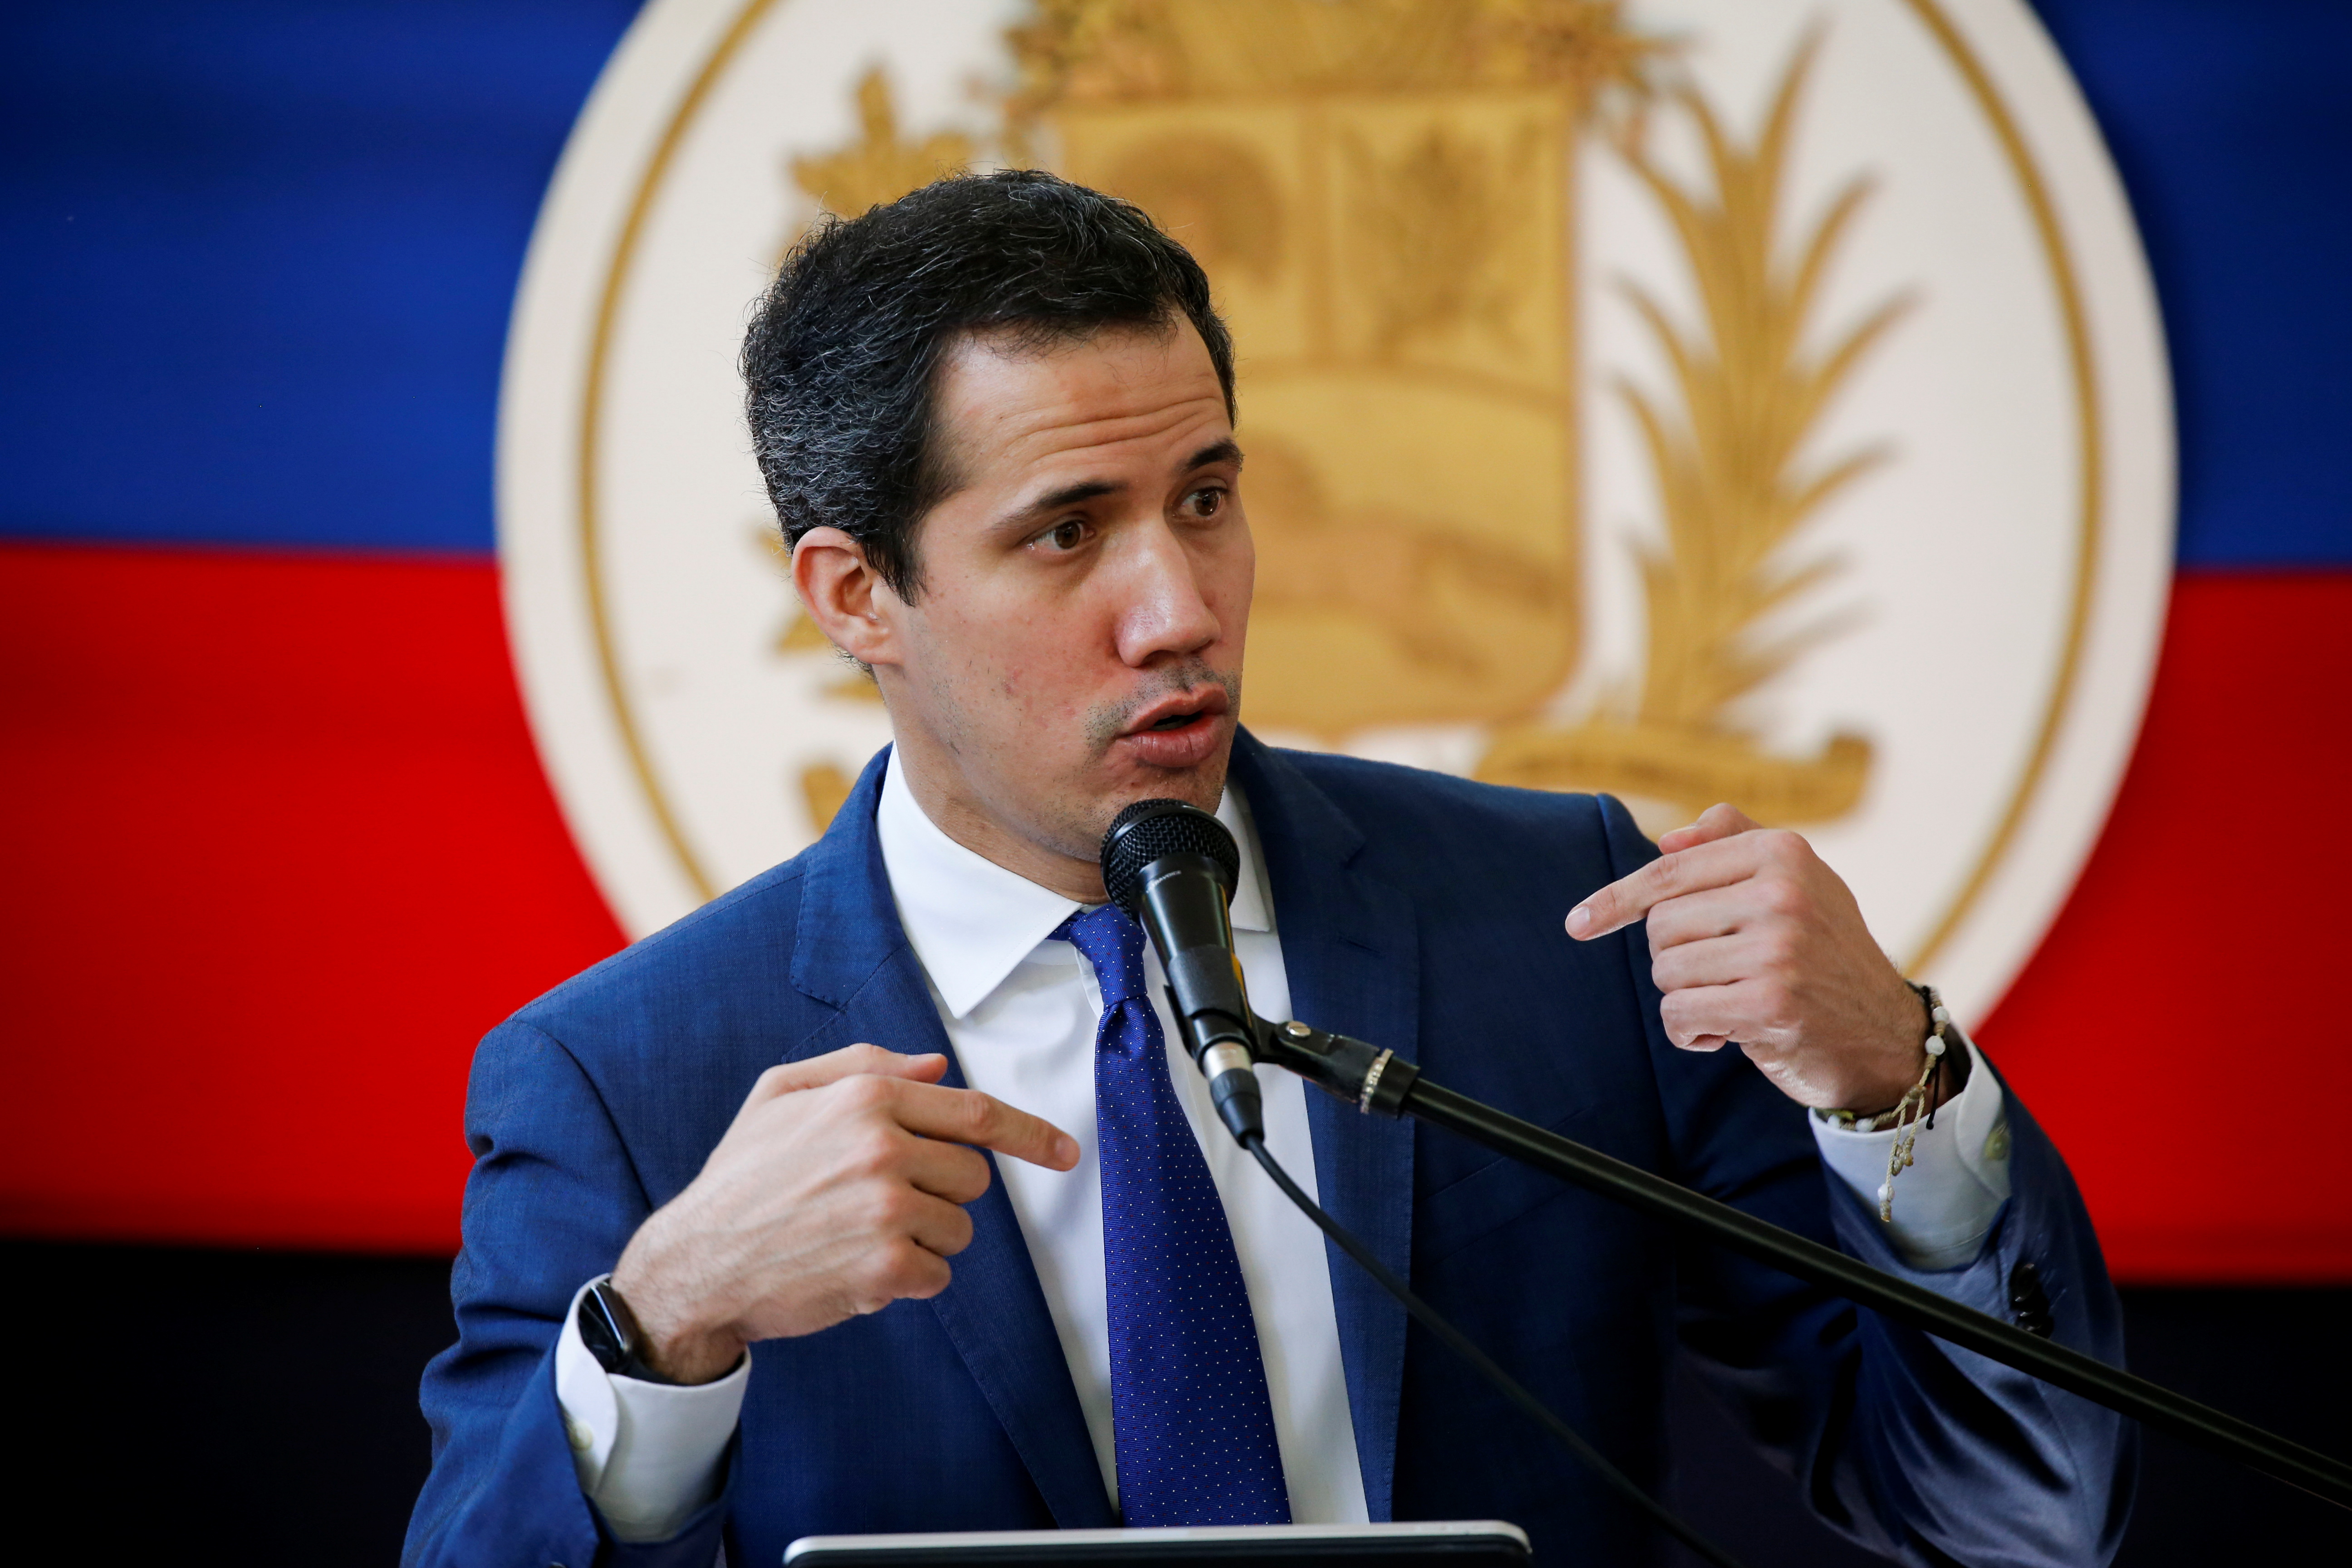 Venezuela's opposition leader Juan Guaido addresses the media the day after regional and local elections, in Caracas